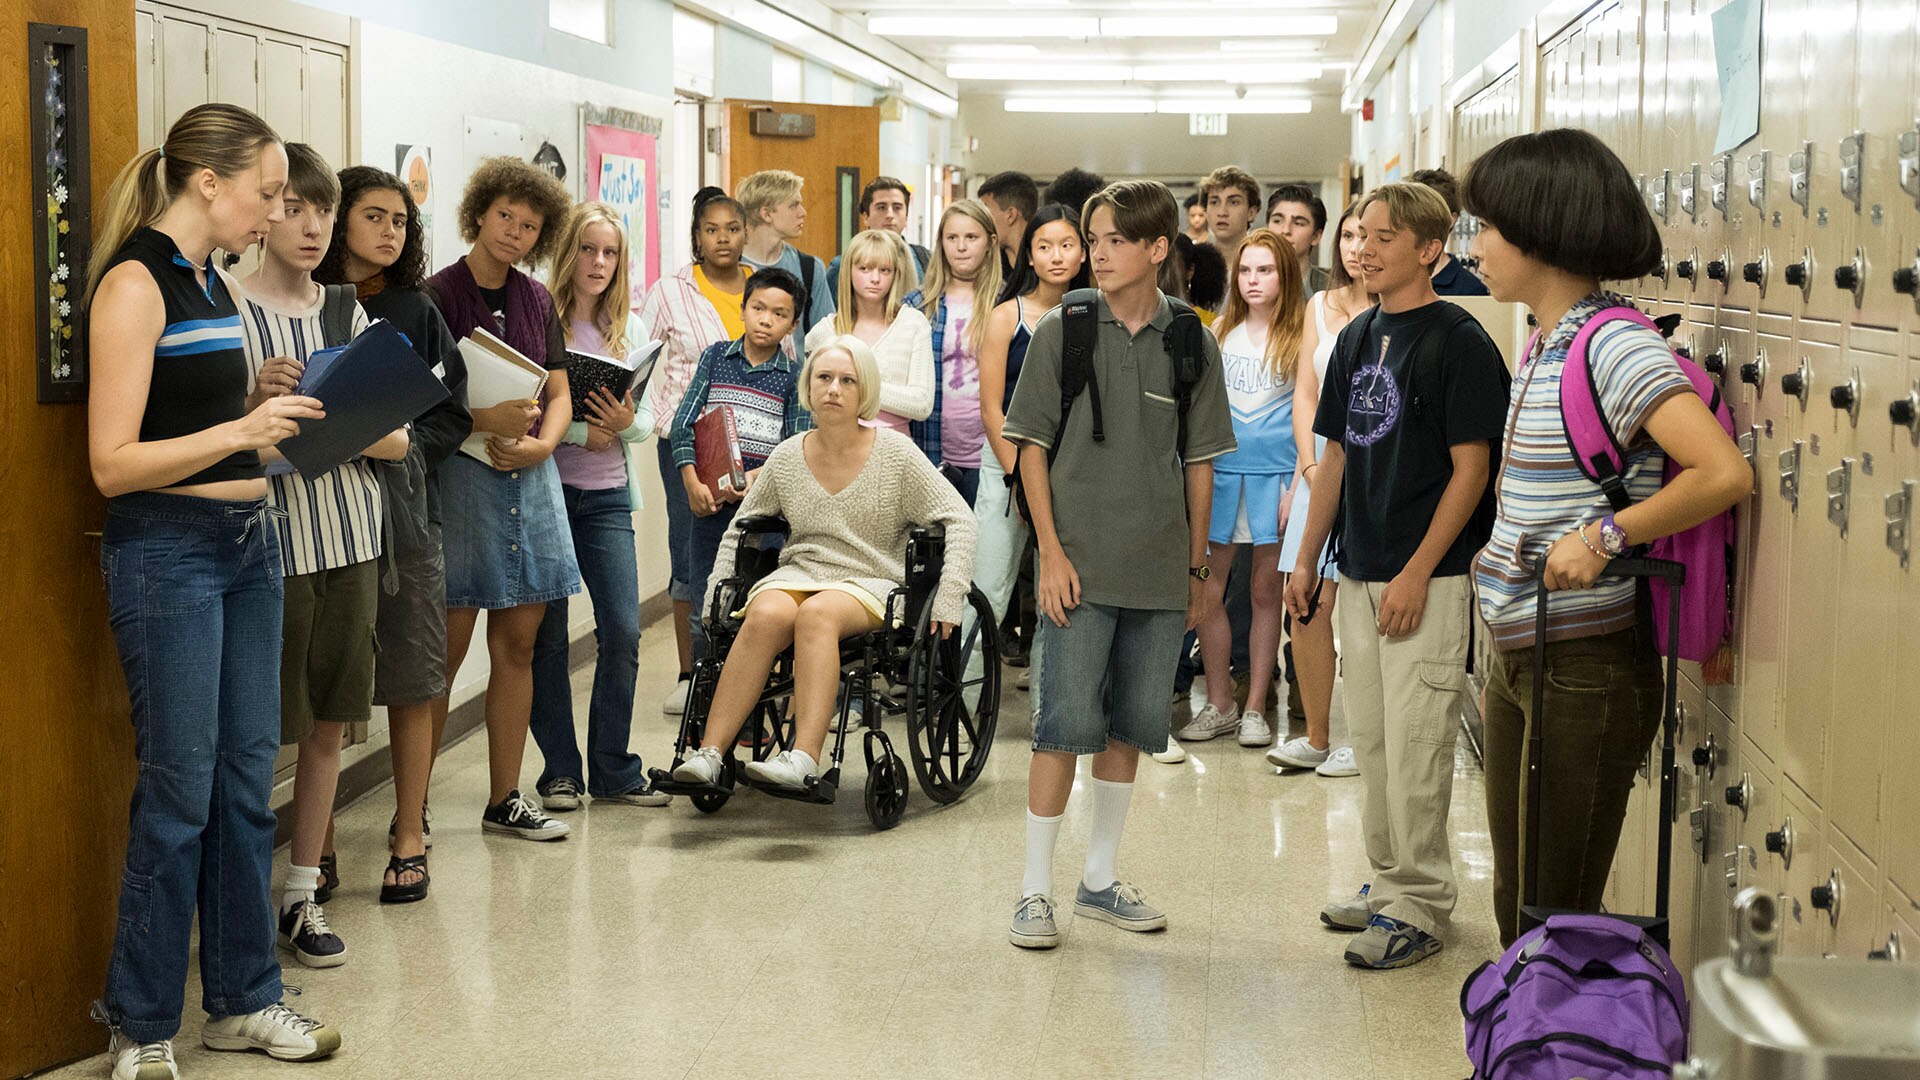 Why Pen15's Middle School Portrayal is Subversive